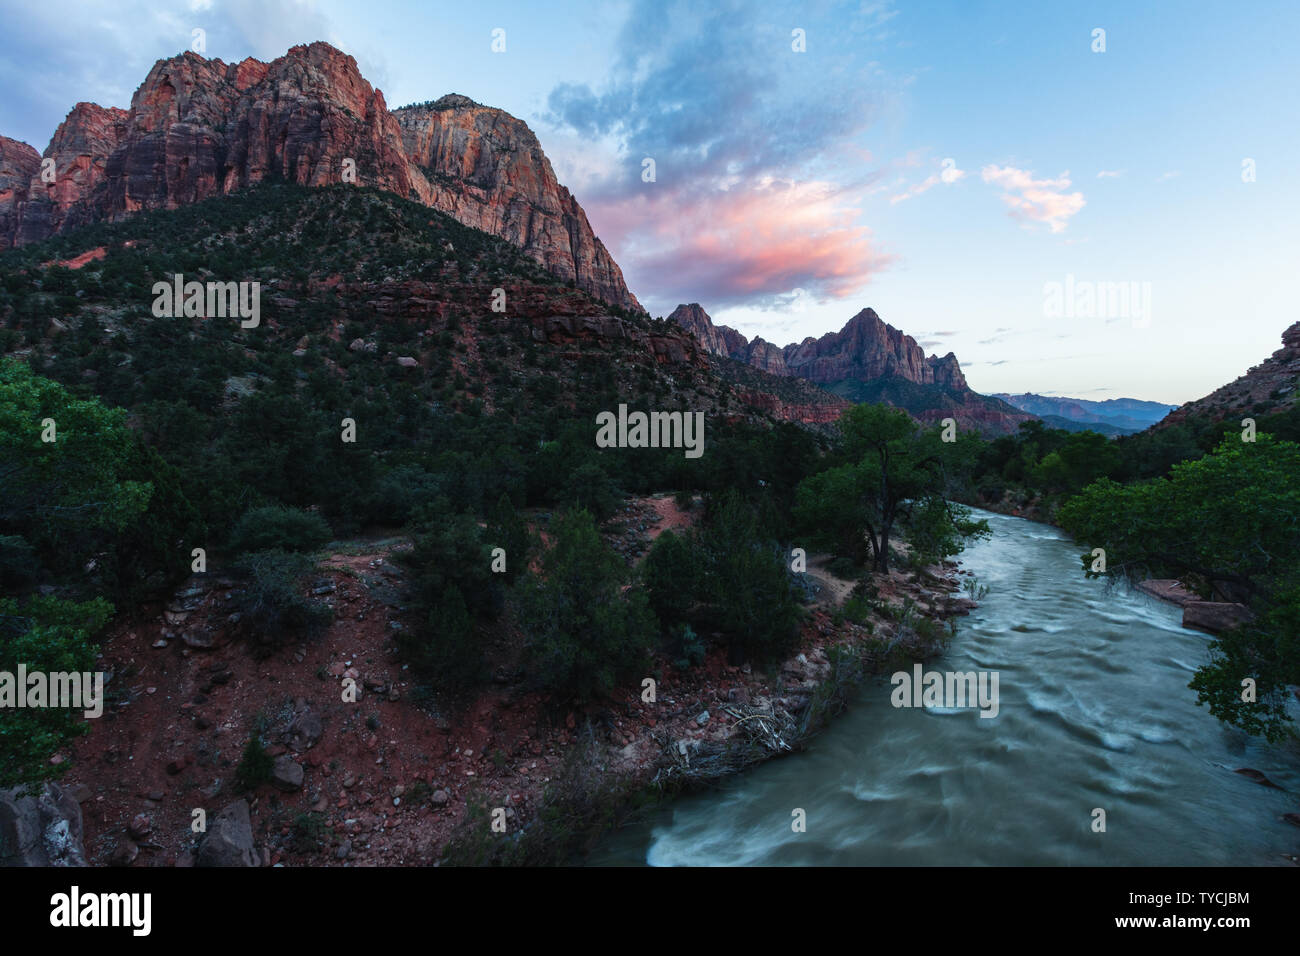 Zion National Park is one of the most beautiful parks in the US, Utah. Canyon Overlook Trail offers beautiful views, sunrises or sunsets make it even Stock Photo